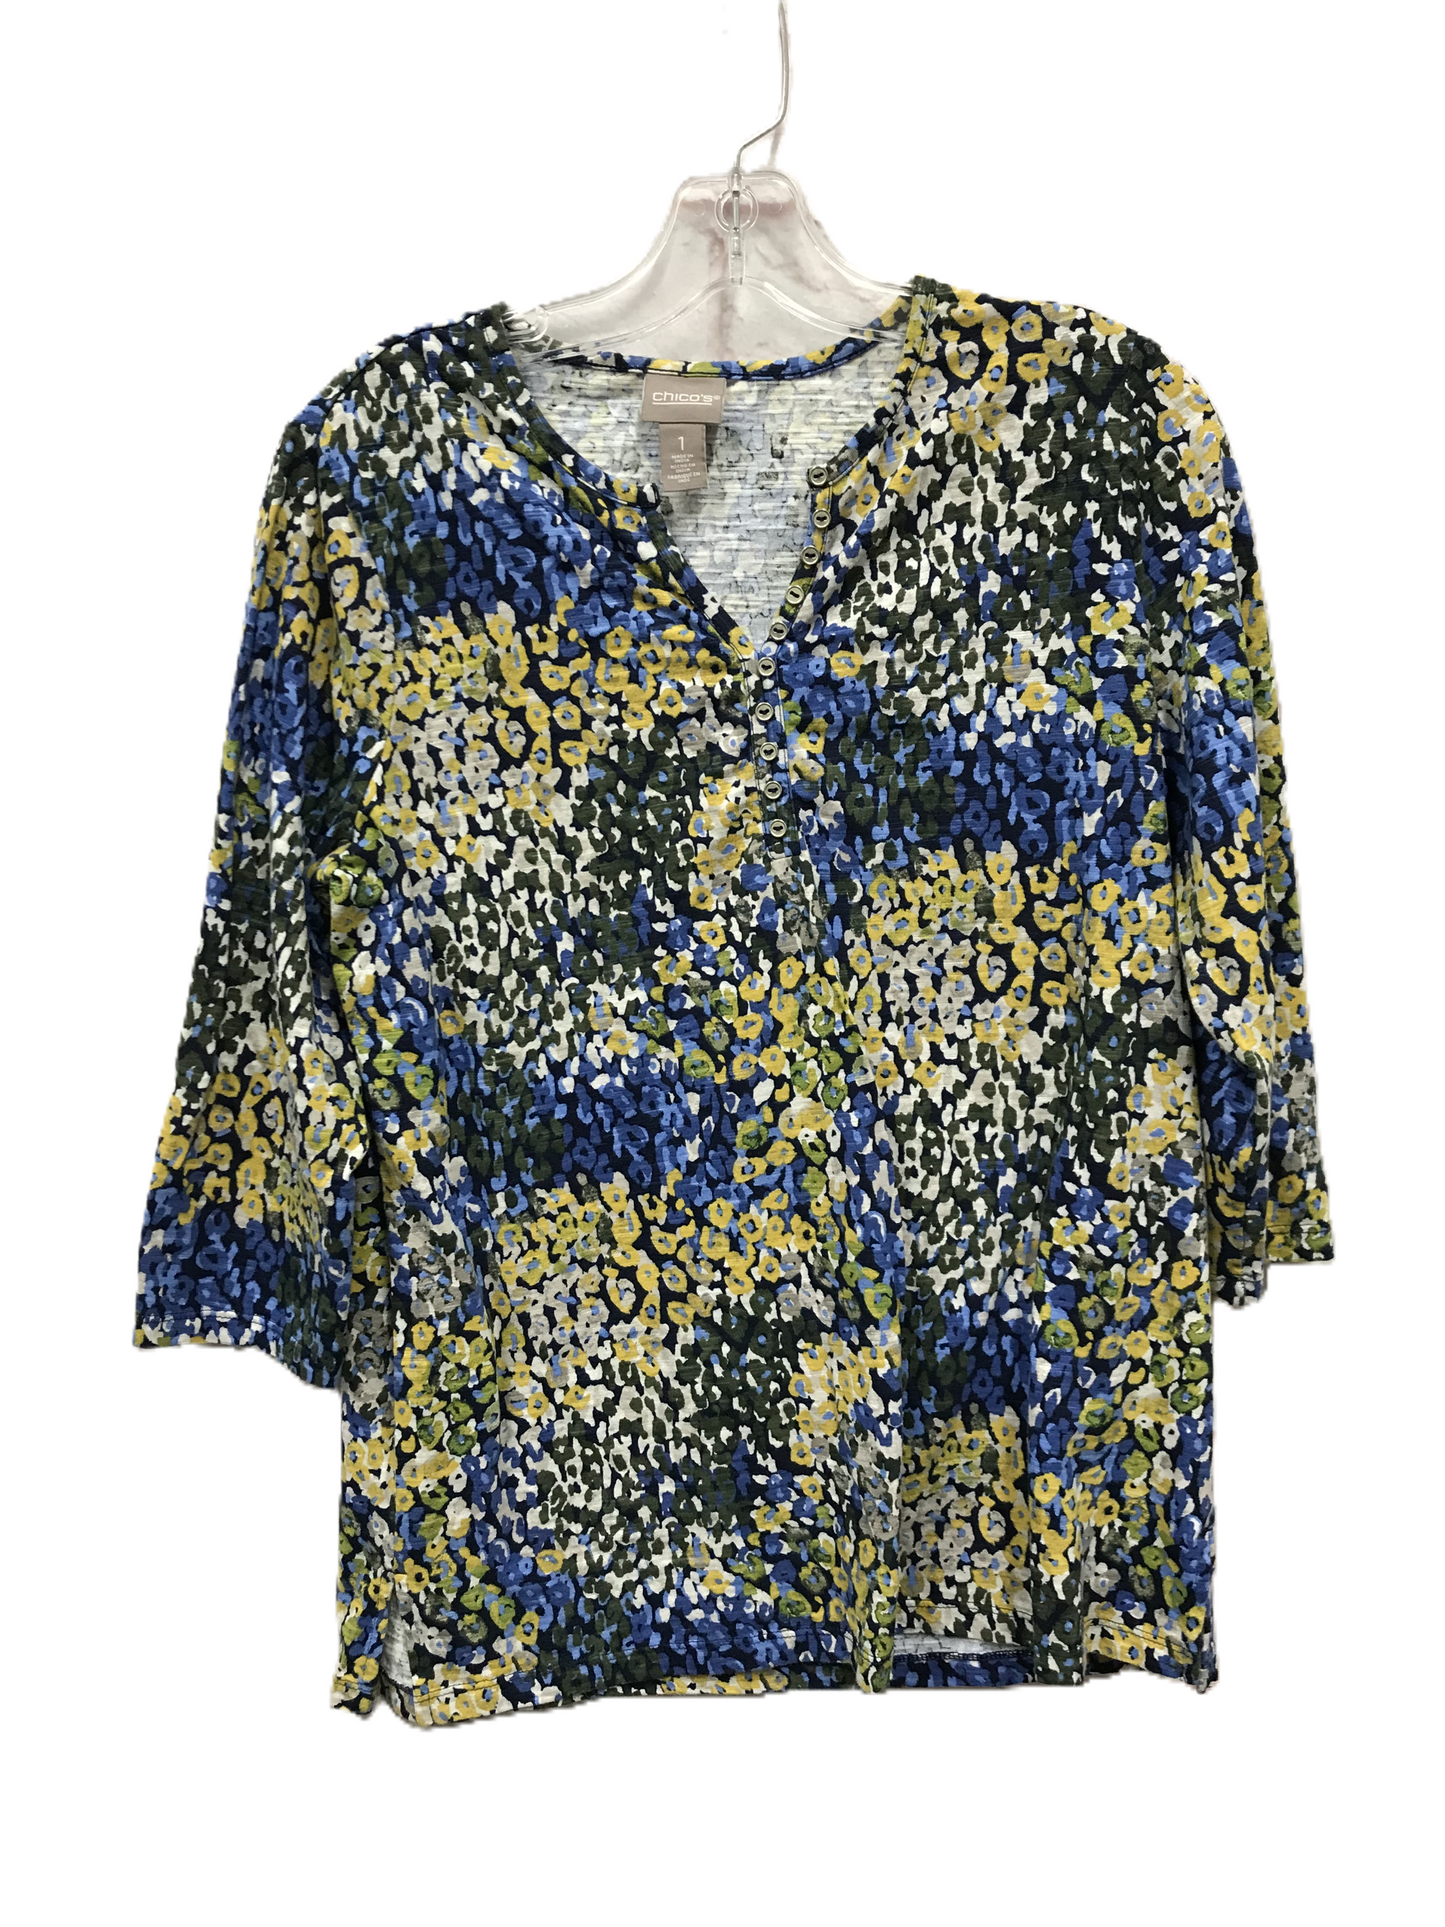 Blue & Yellow Top 3/4 Sleeve By Chicos, Size: M